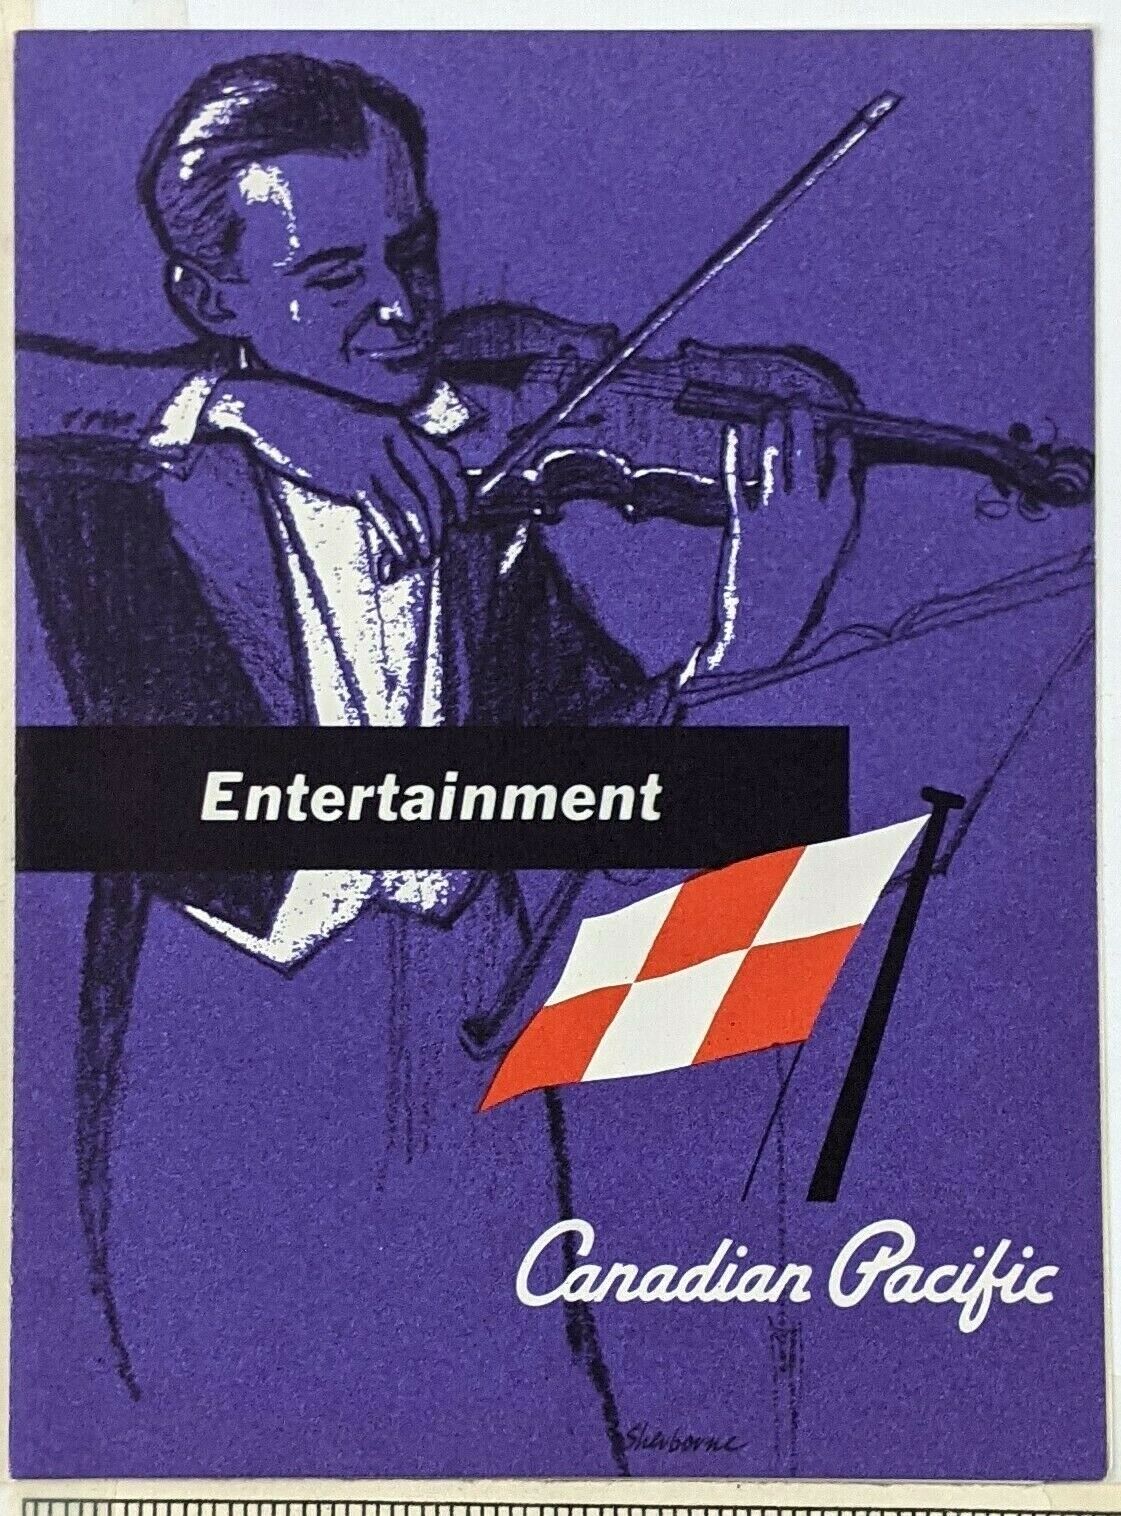 1964 Canadian Pacific Steamship SS Empress of England June 21 Entertainment Card